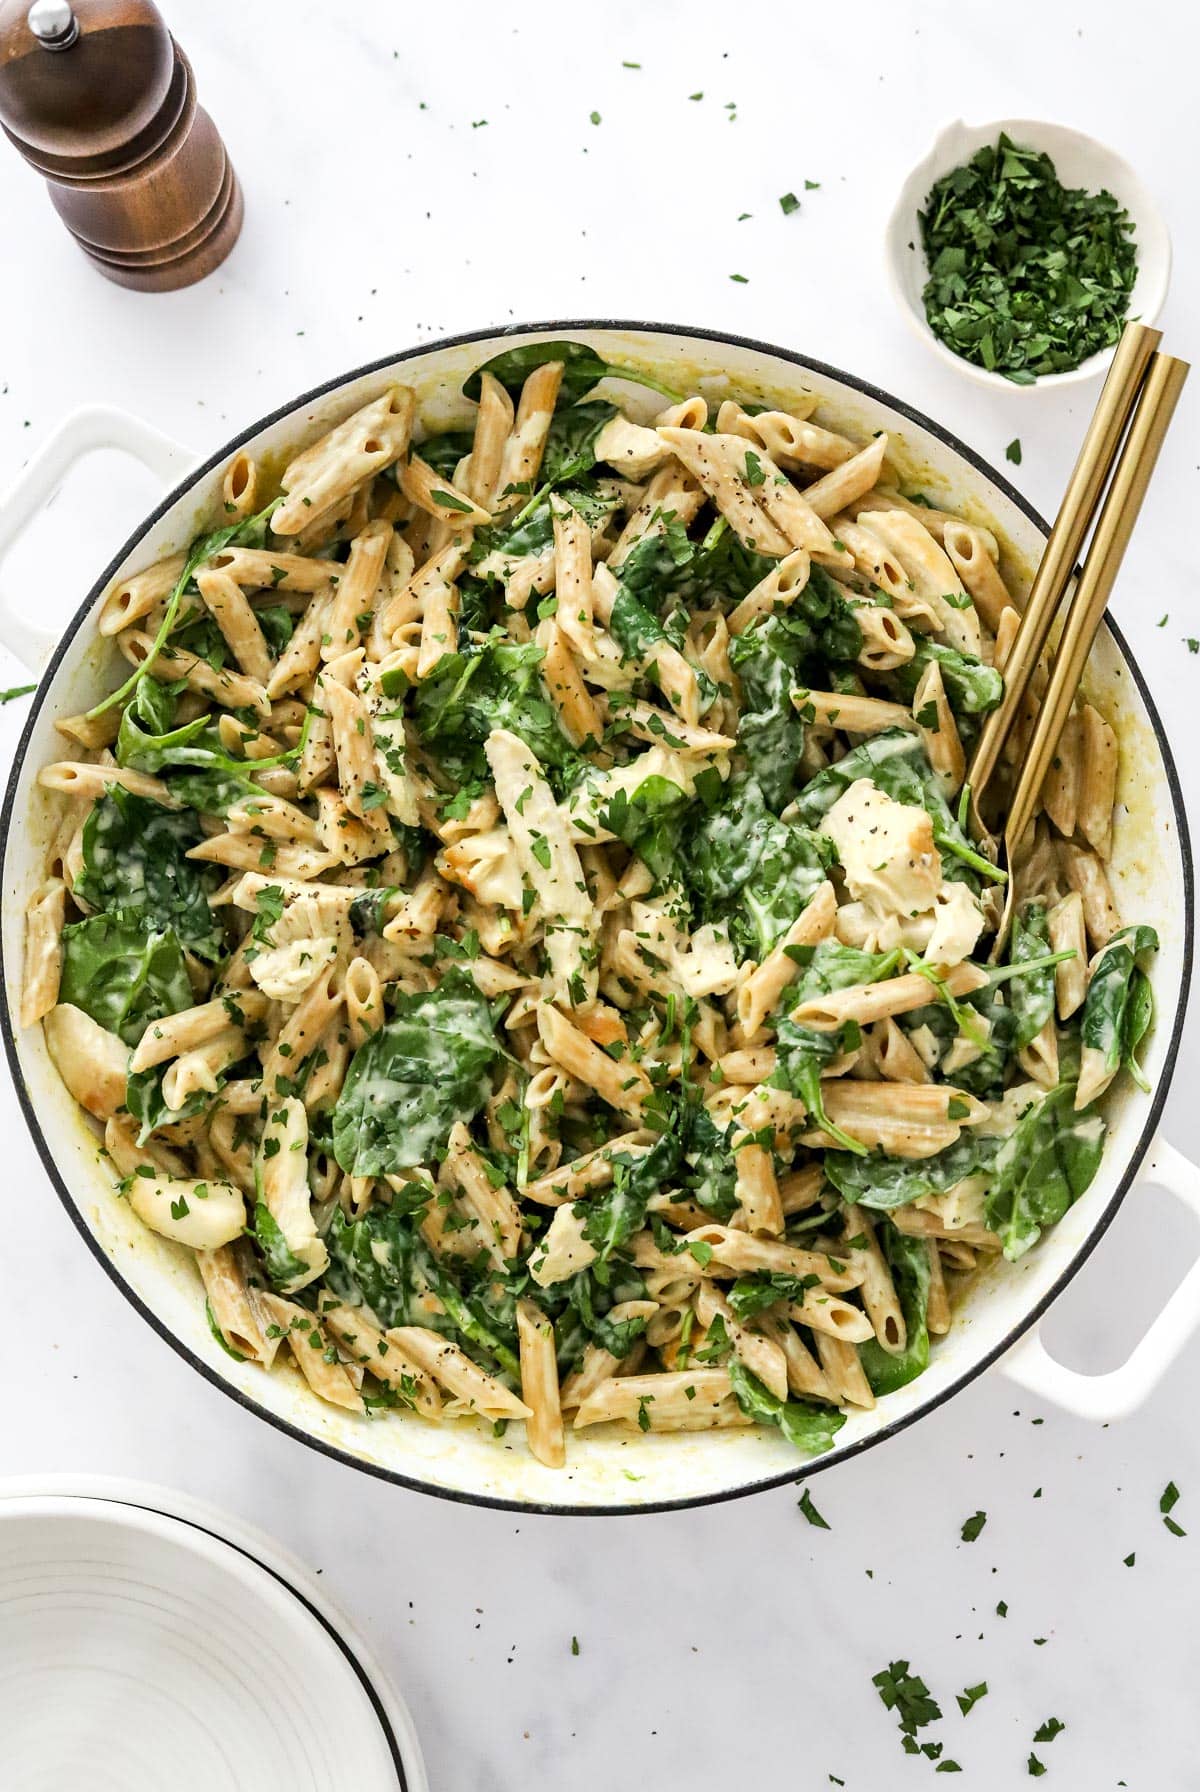 Chicken spinach pasta in a white pot with pepper grinder and small bowl of parsley.